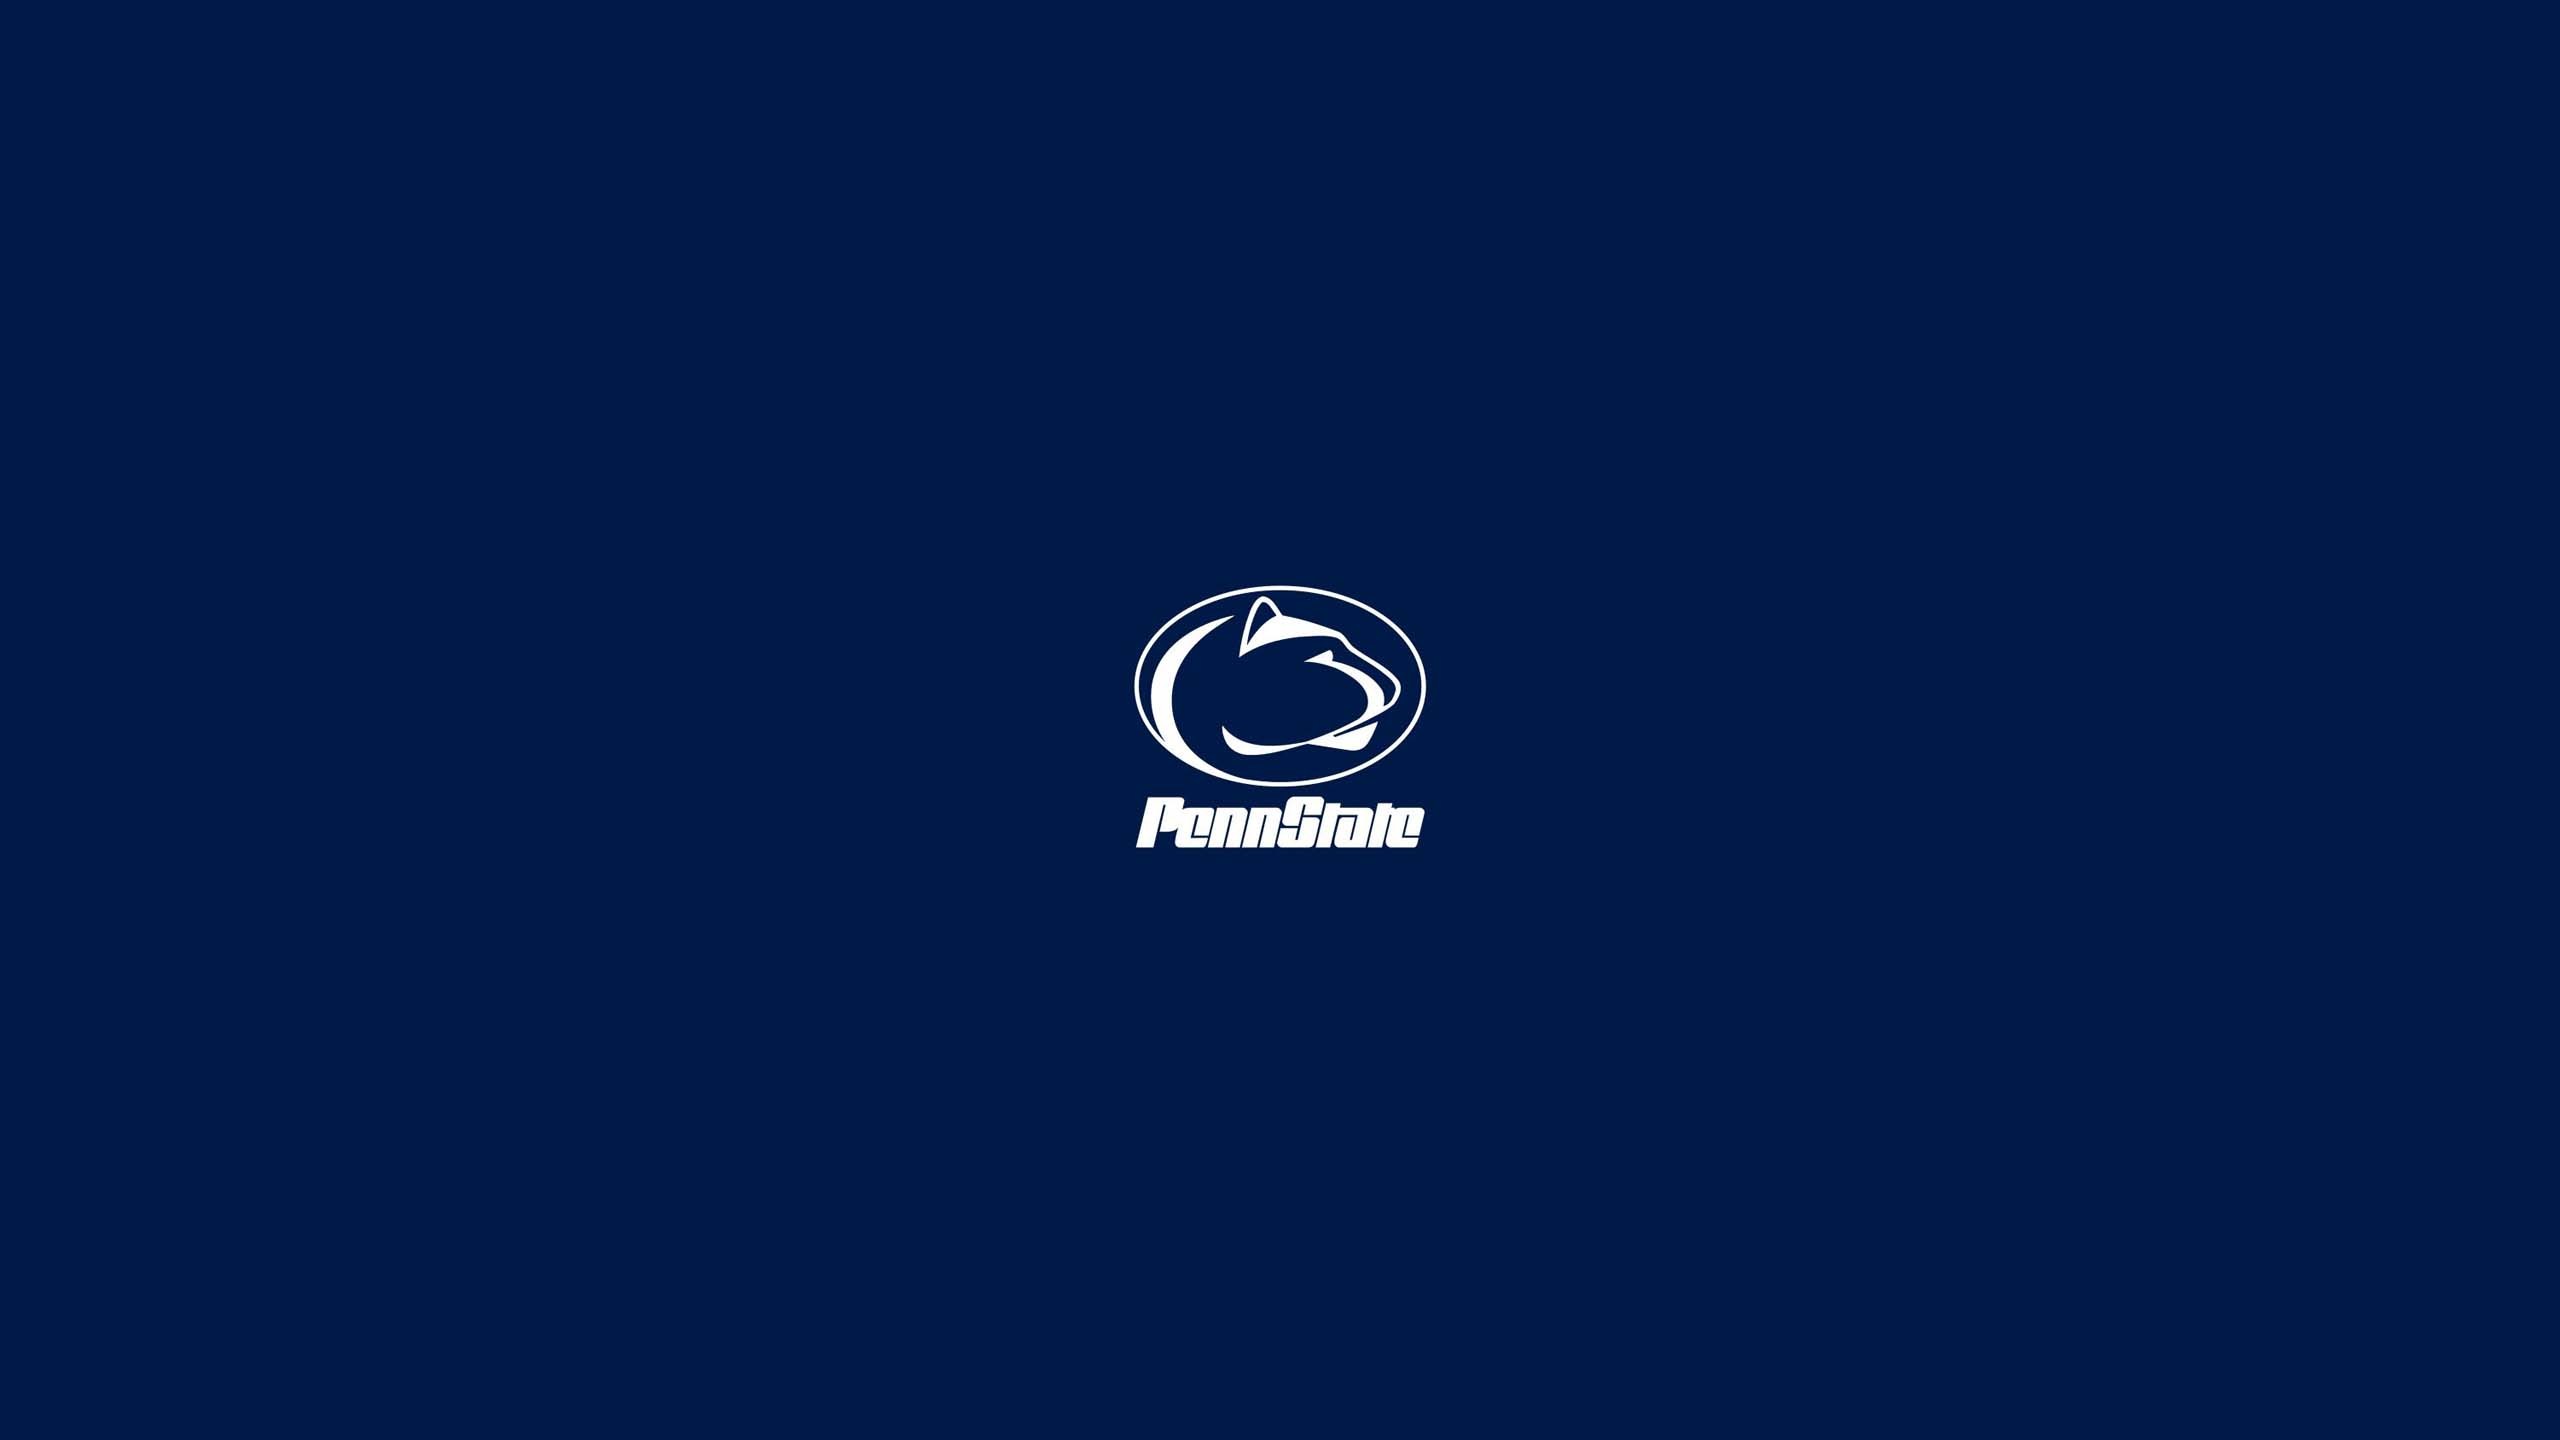 2560x1440 Penn State Wallpaper Images | TheCelebrityPix